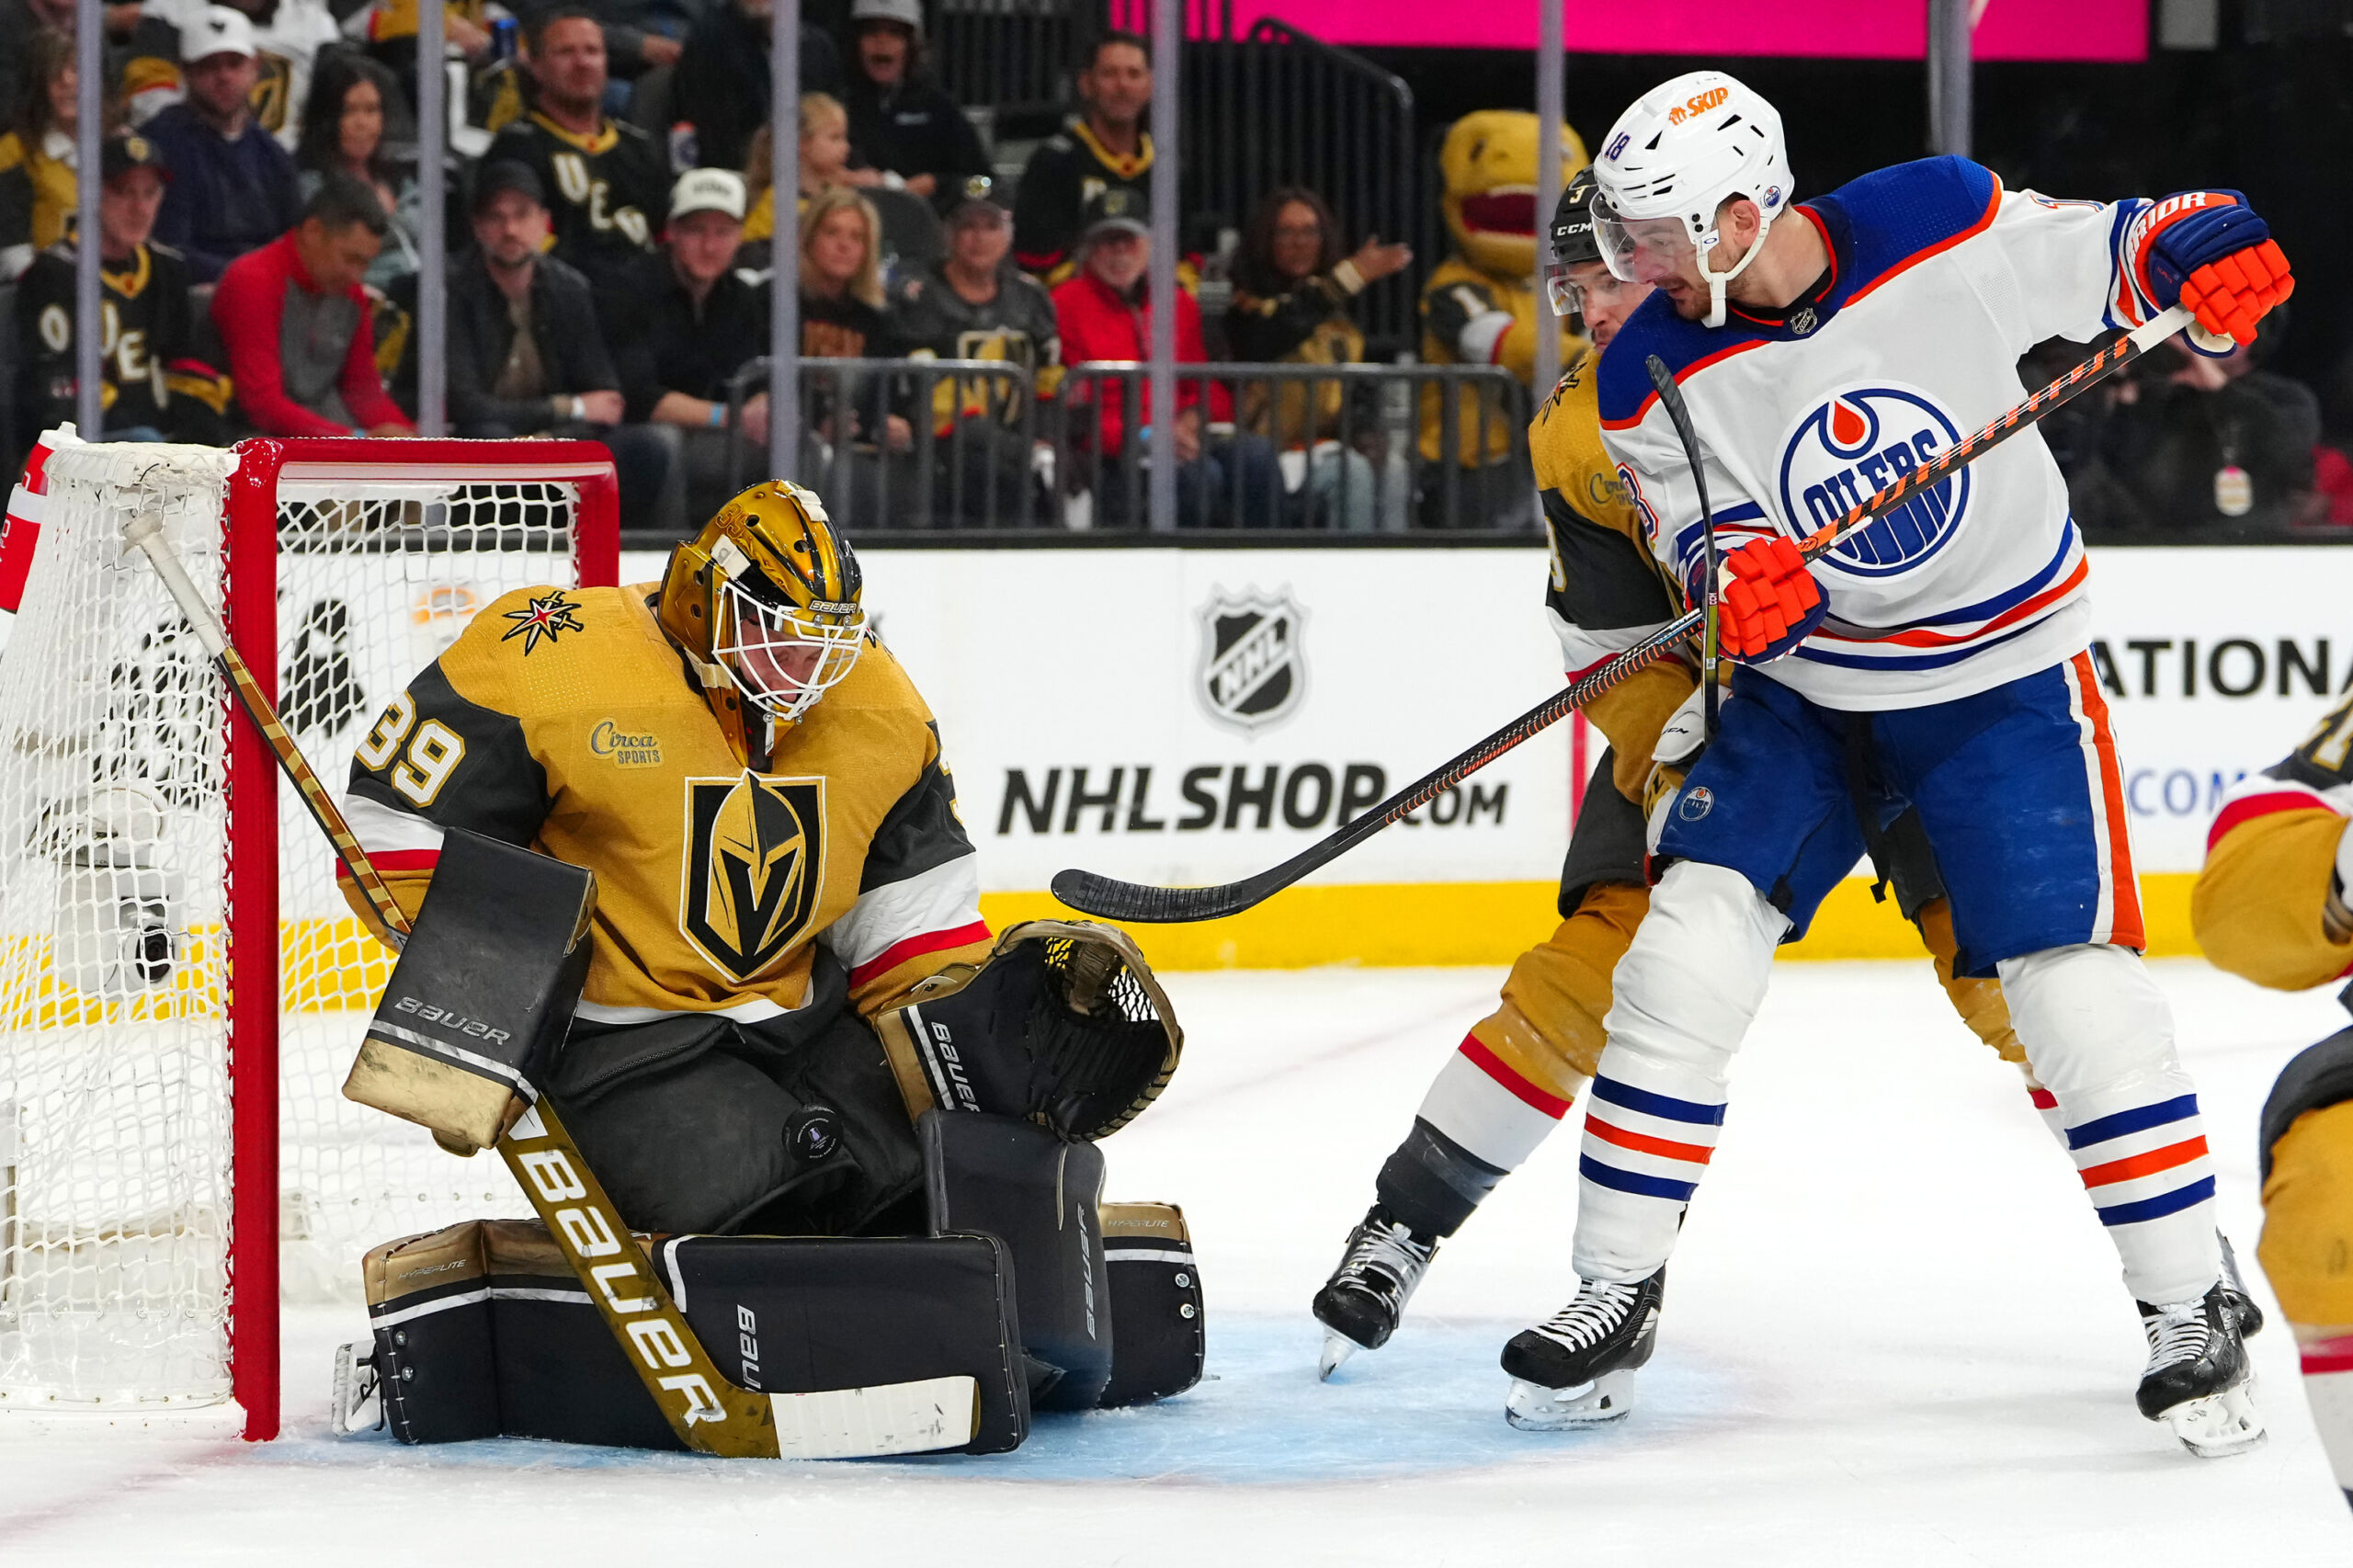 Draisaitl's 4 goals not enough for Oilers as Golden Knights take